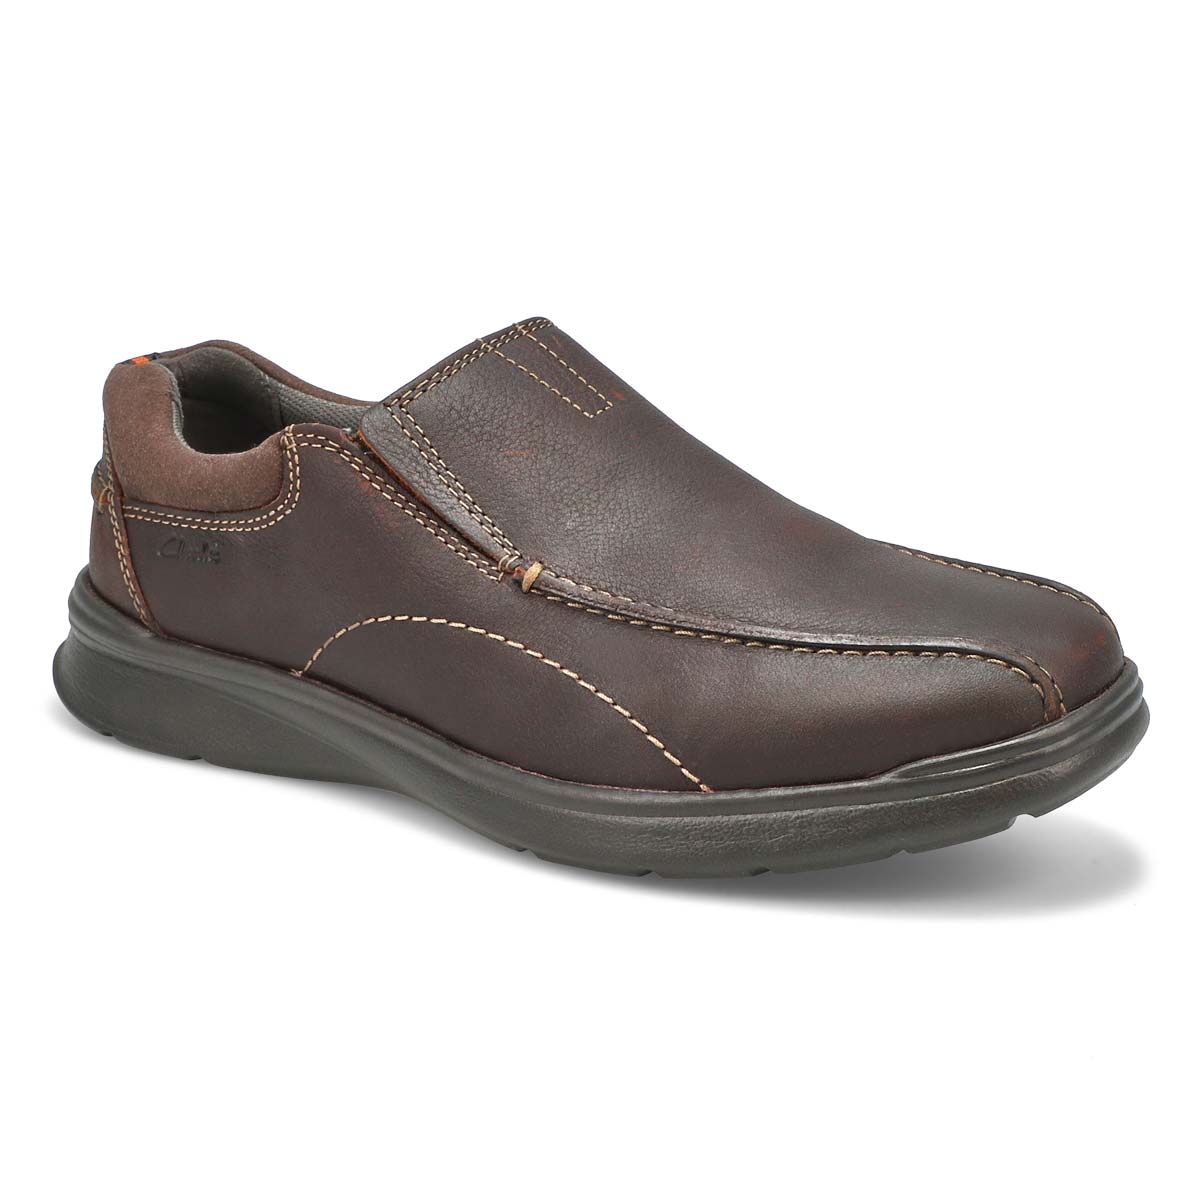 where to buy clarks shoes online in canada